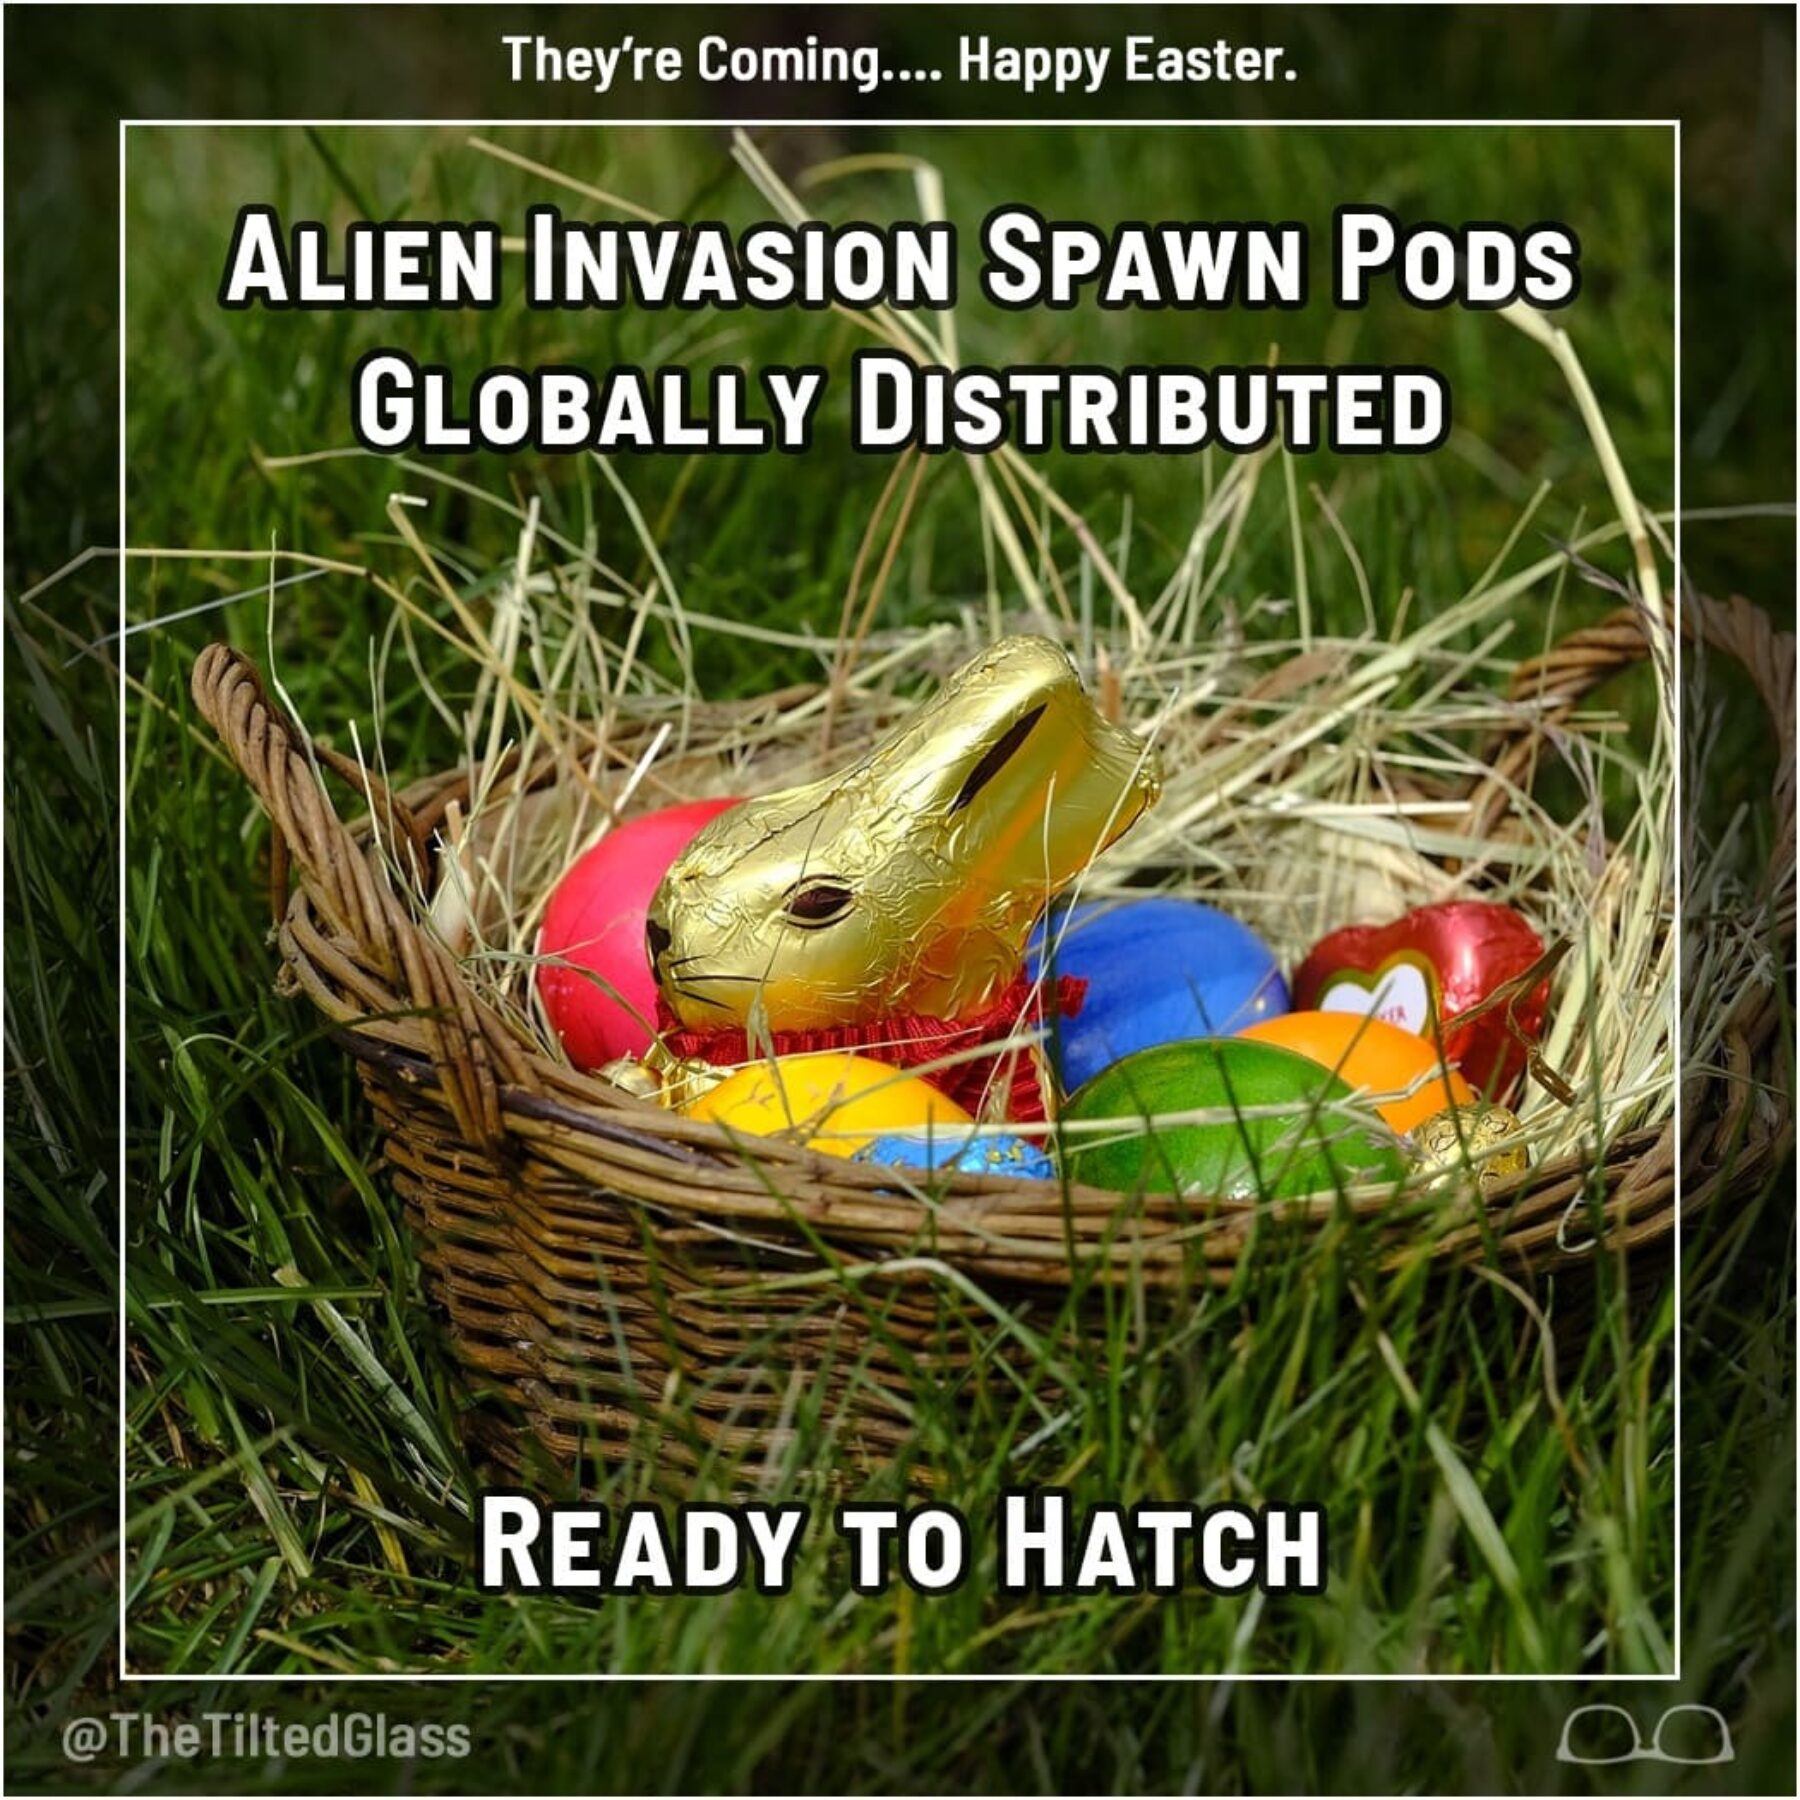 Alien Invasion Spawn Pods Globally Distributed.  Ready to Hatch.